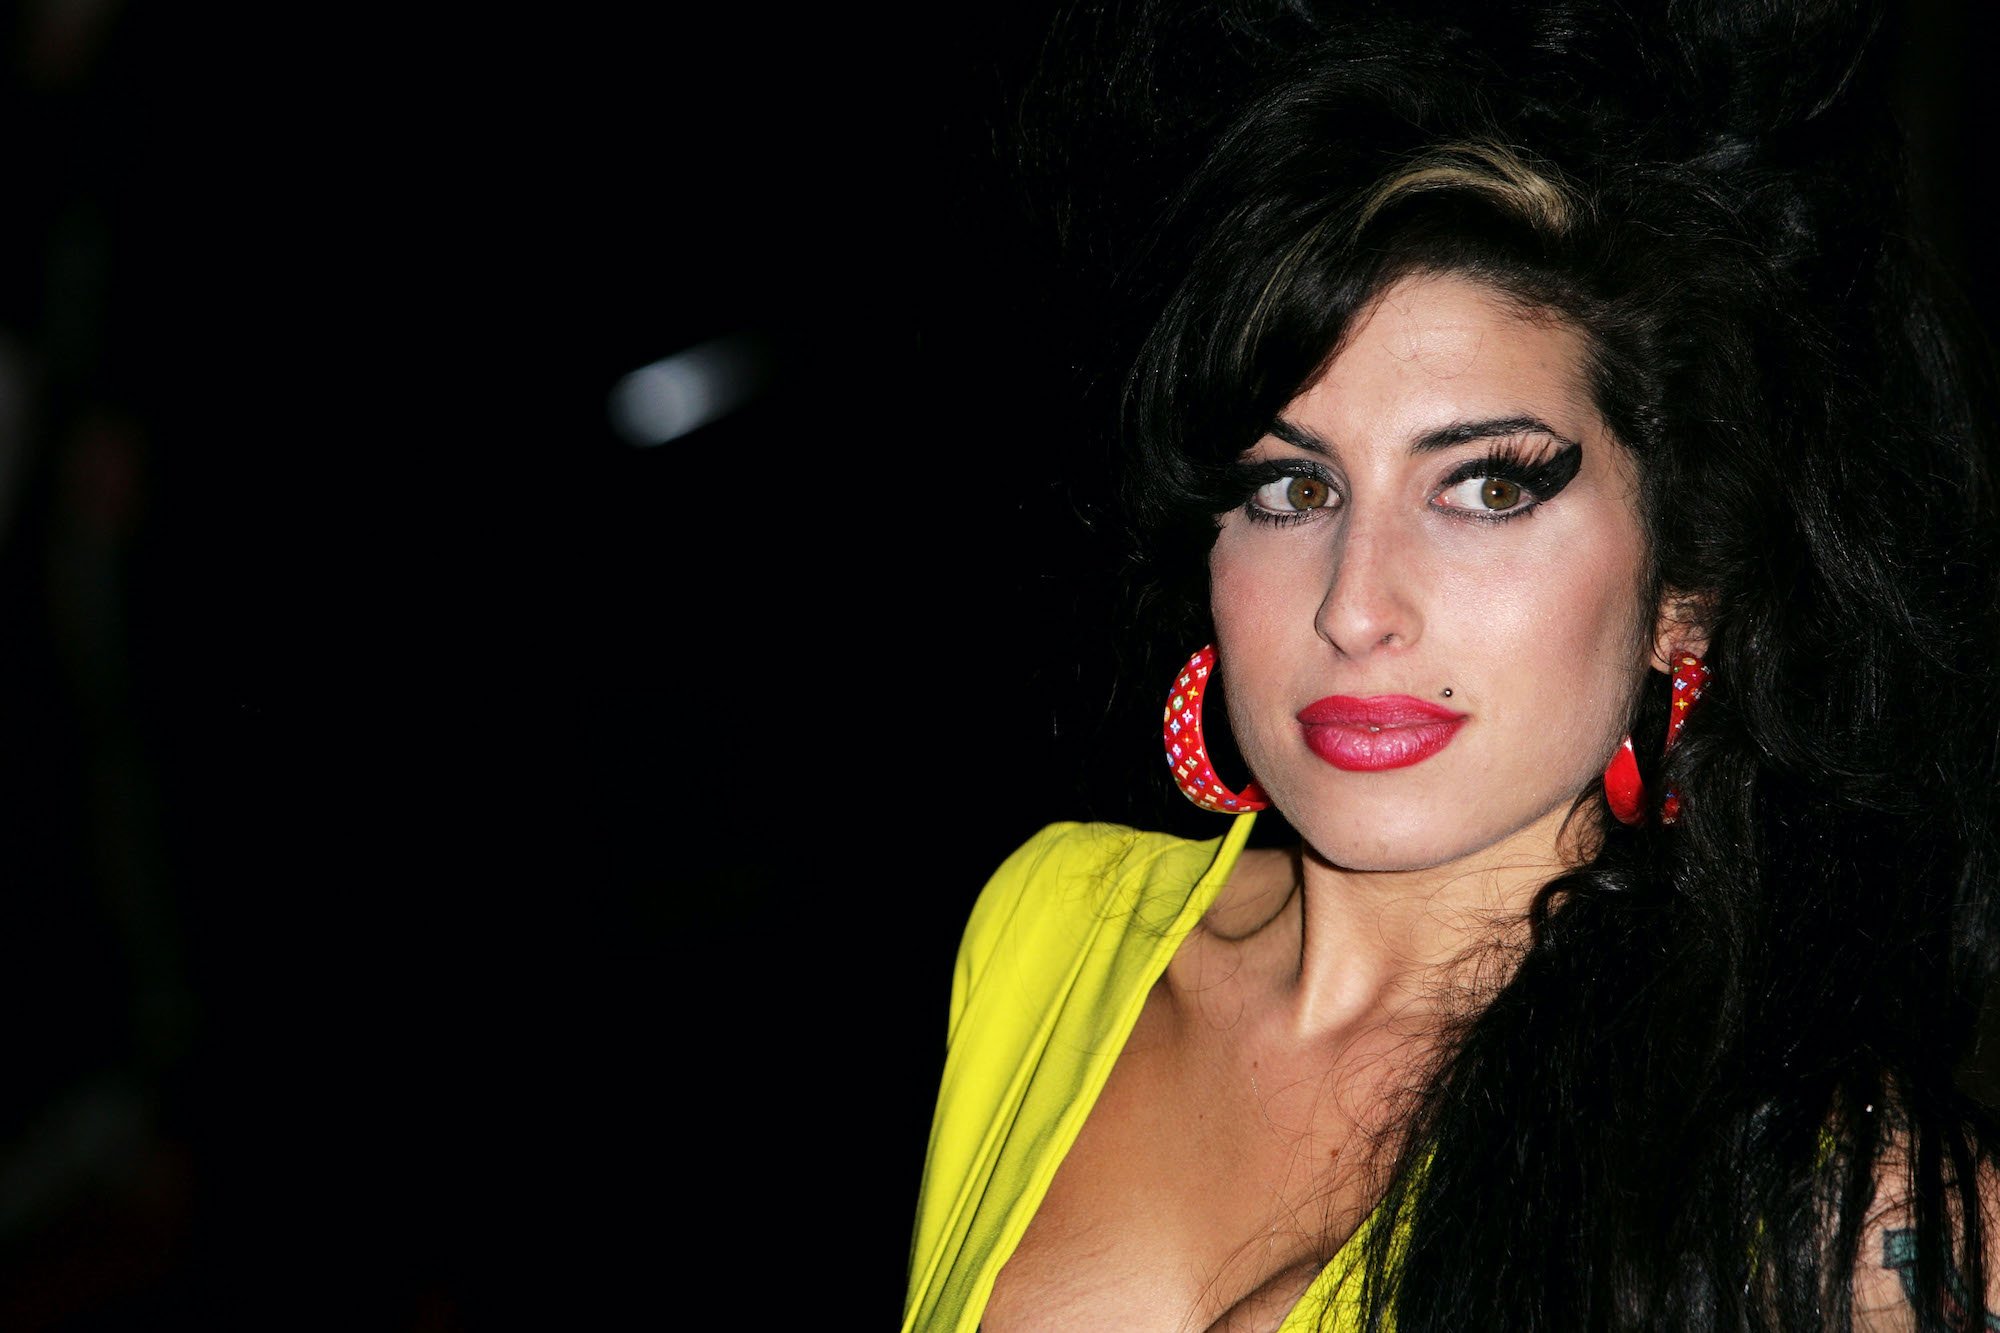 Amy Winehouse smiling, looking off camera